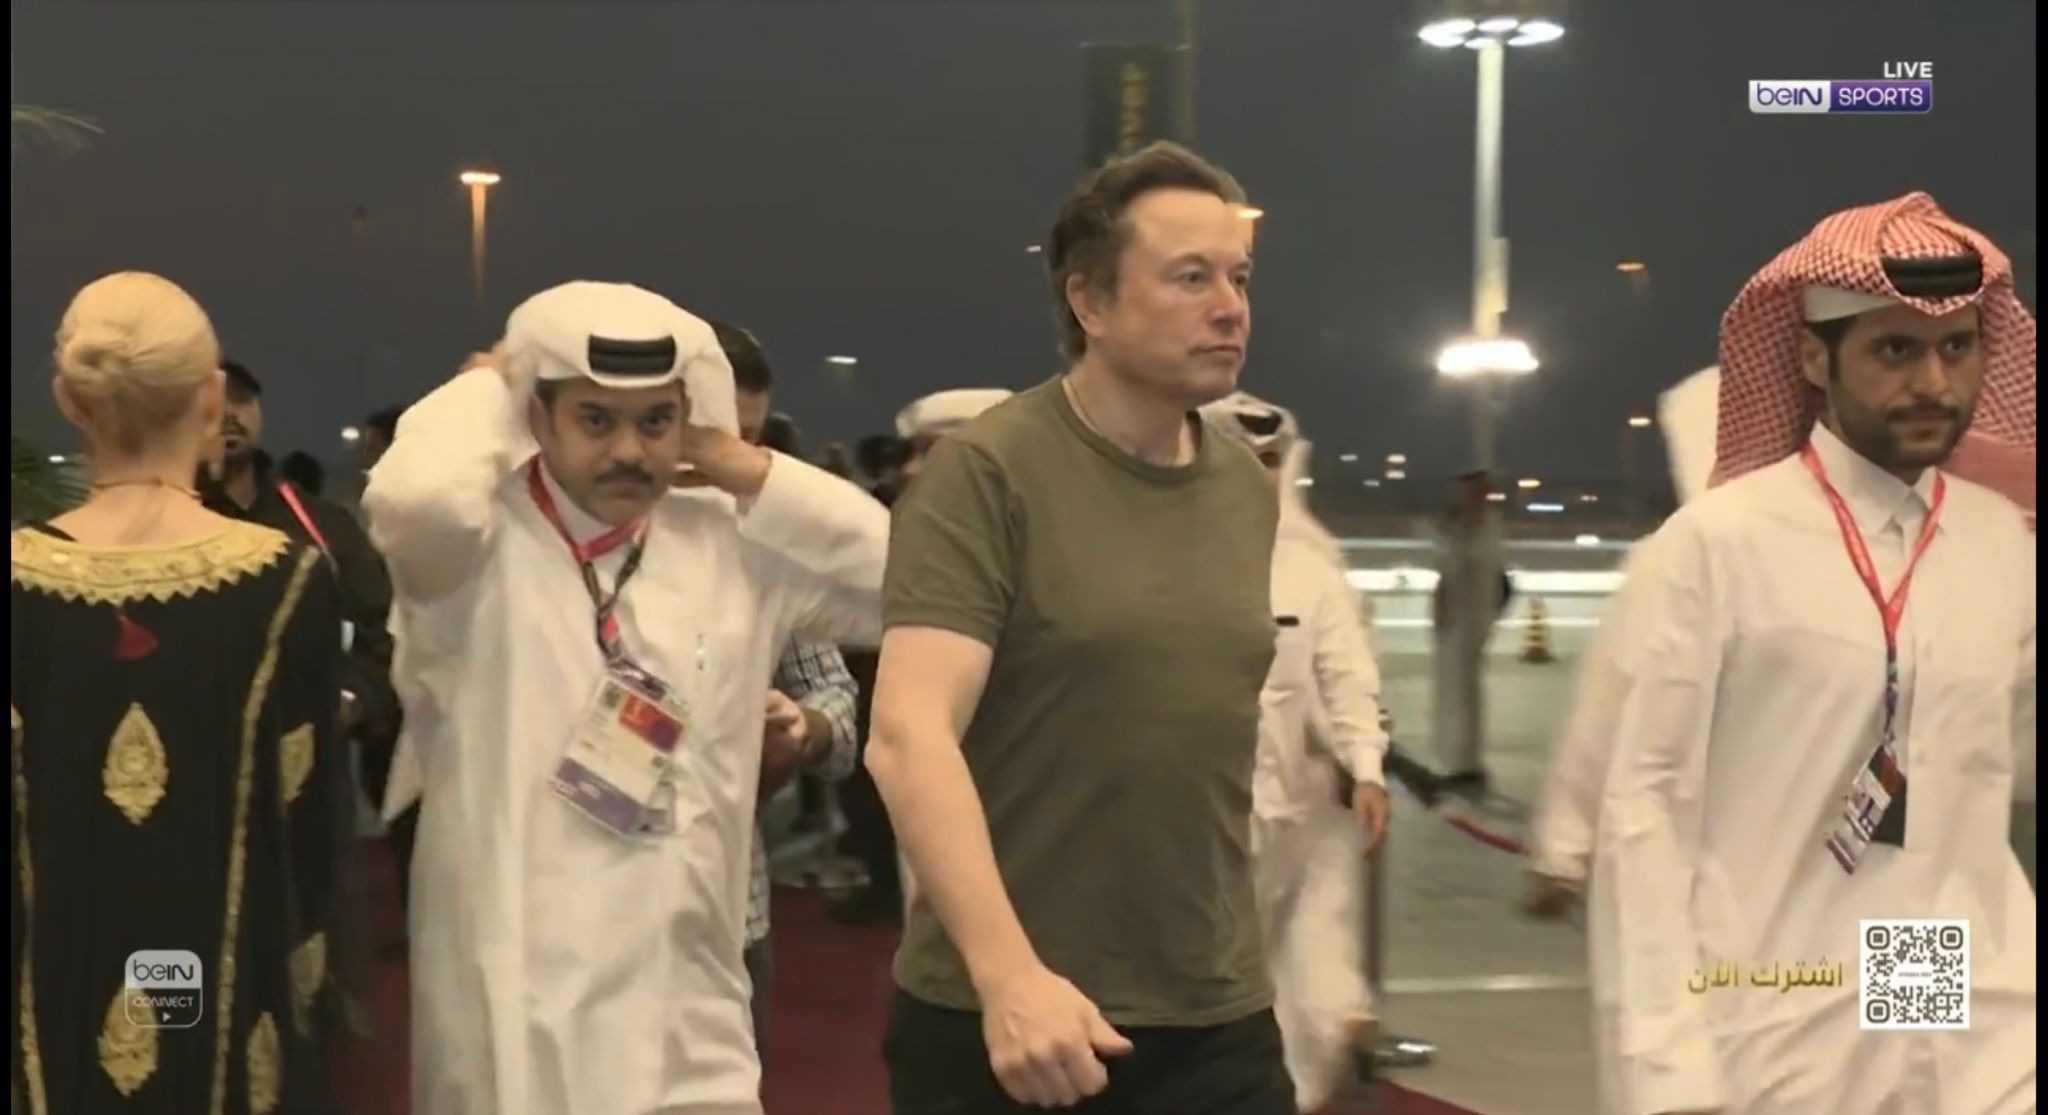 Twitter chief Elon Musk attends Argentina vs France FIFA World Cup 2022 final at Lusail Stadium: Watch